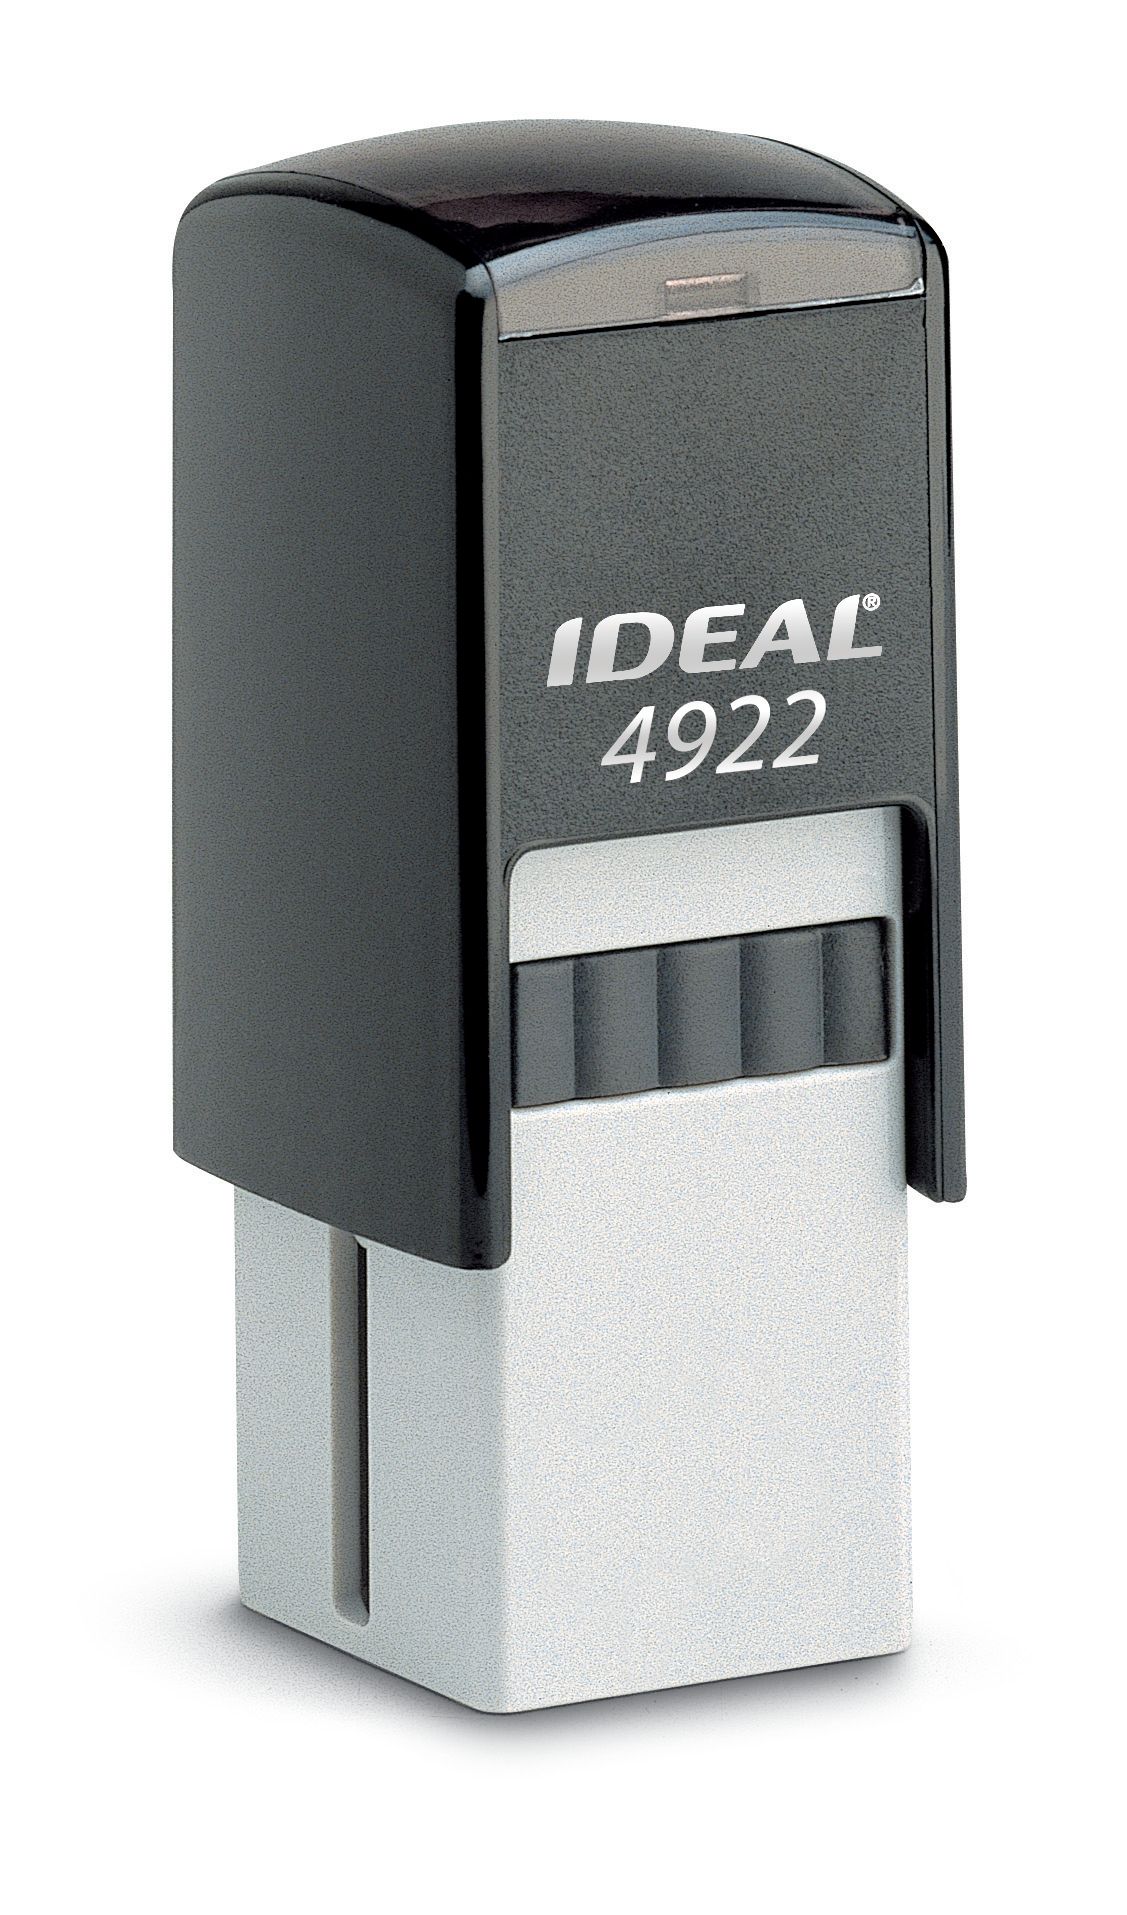 Ideal 4922 Self Inking Stamp